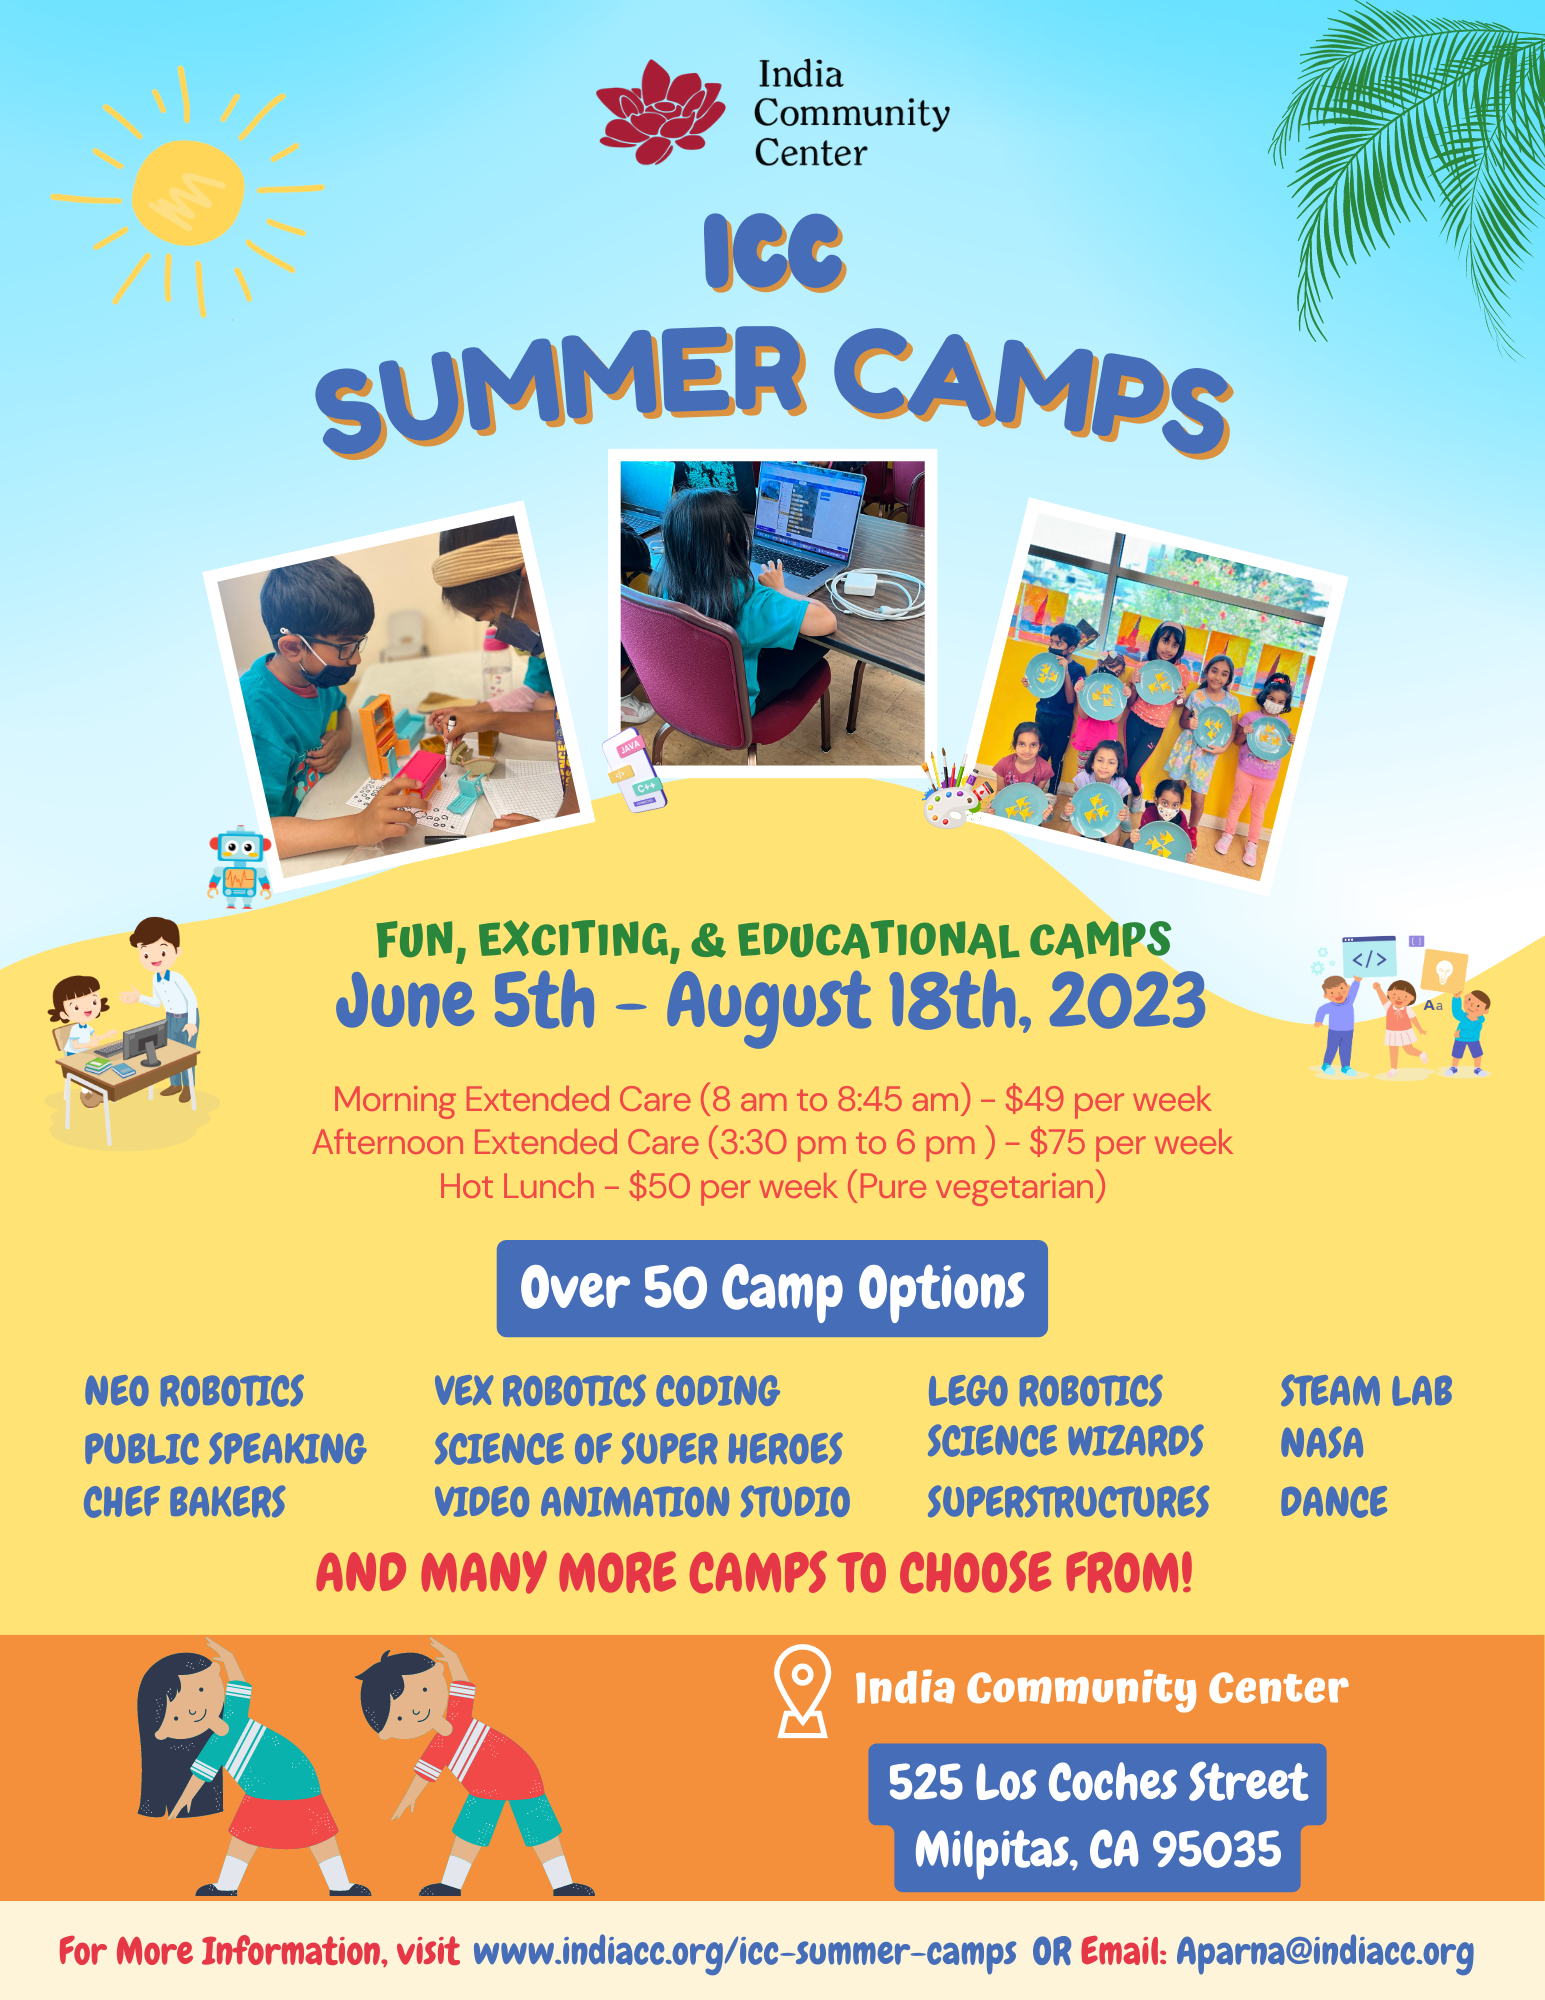 Summer Camps Indiacc